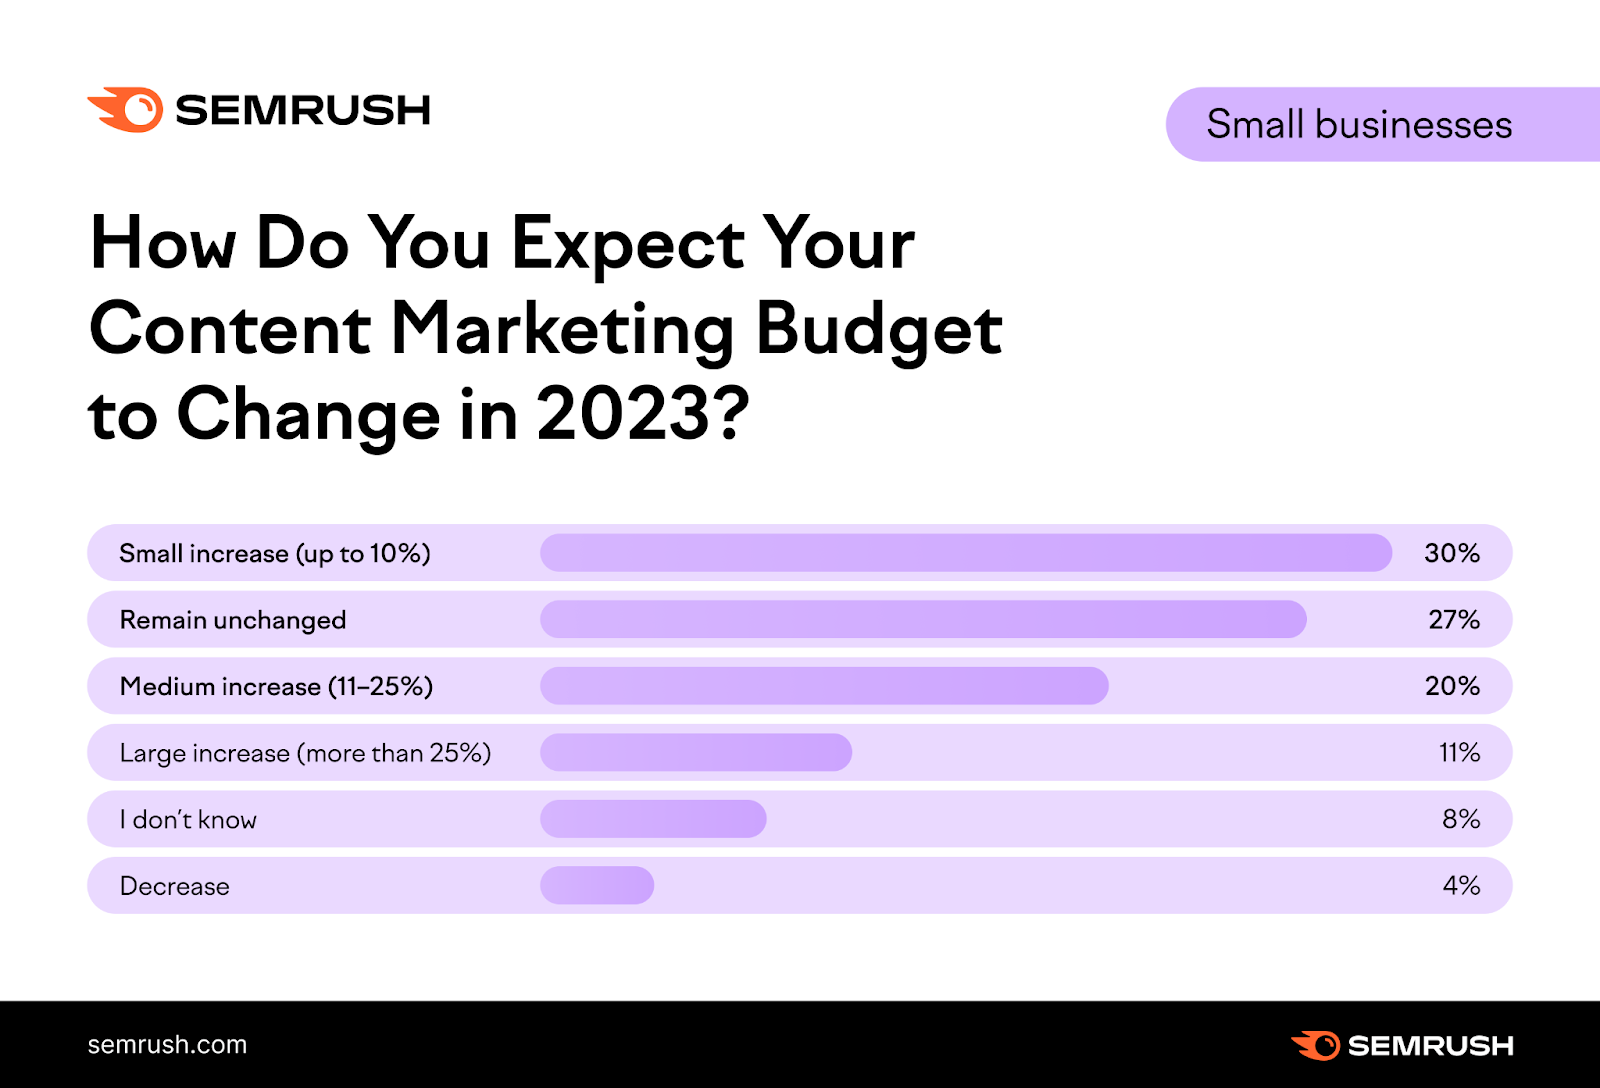 Content marketing budgets in small businesses